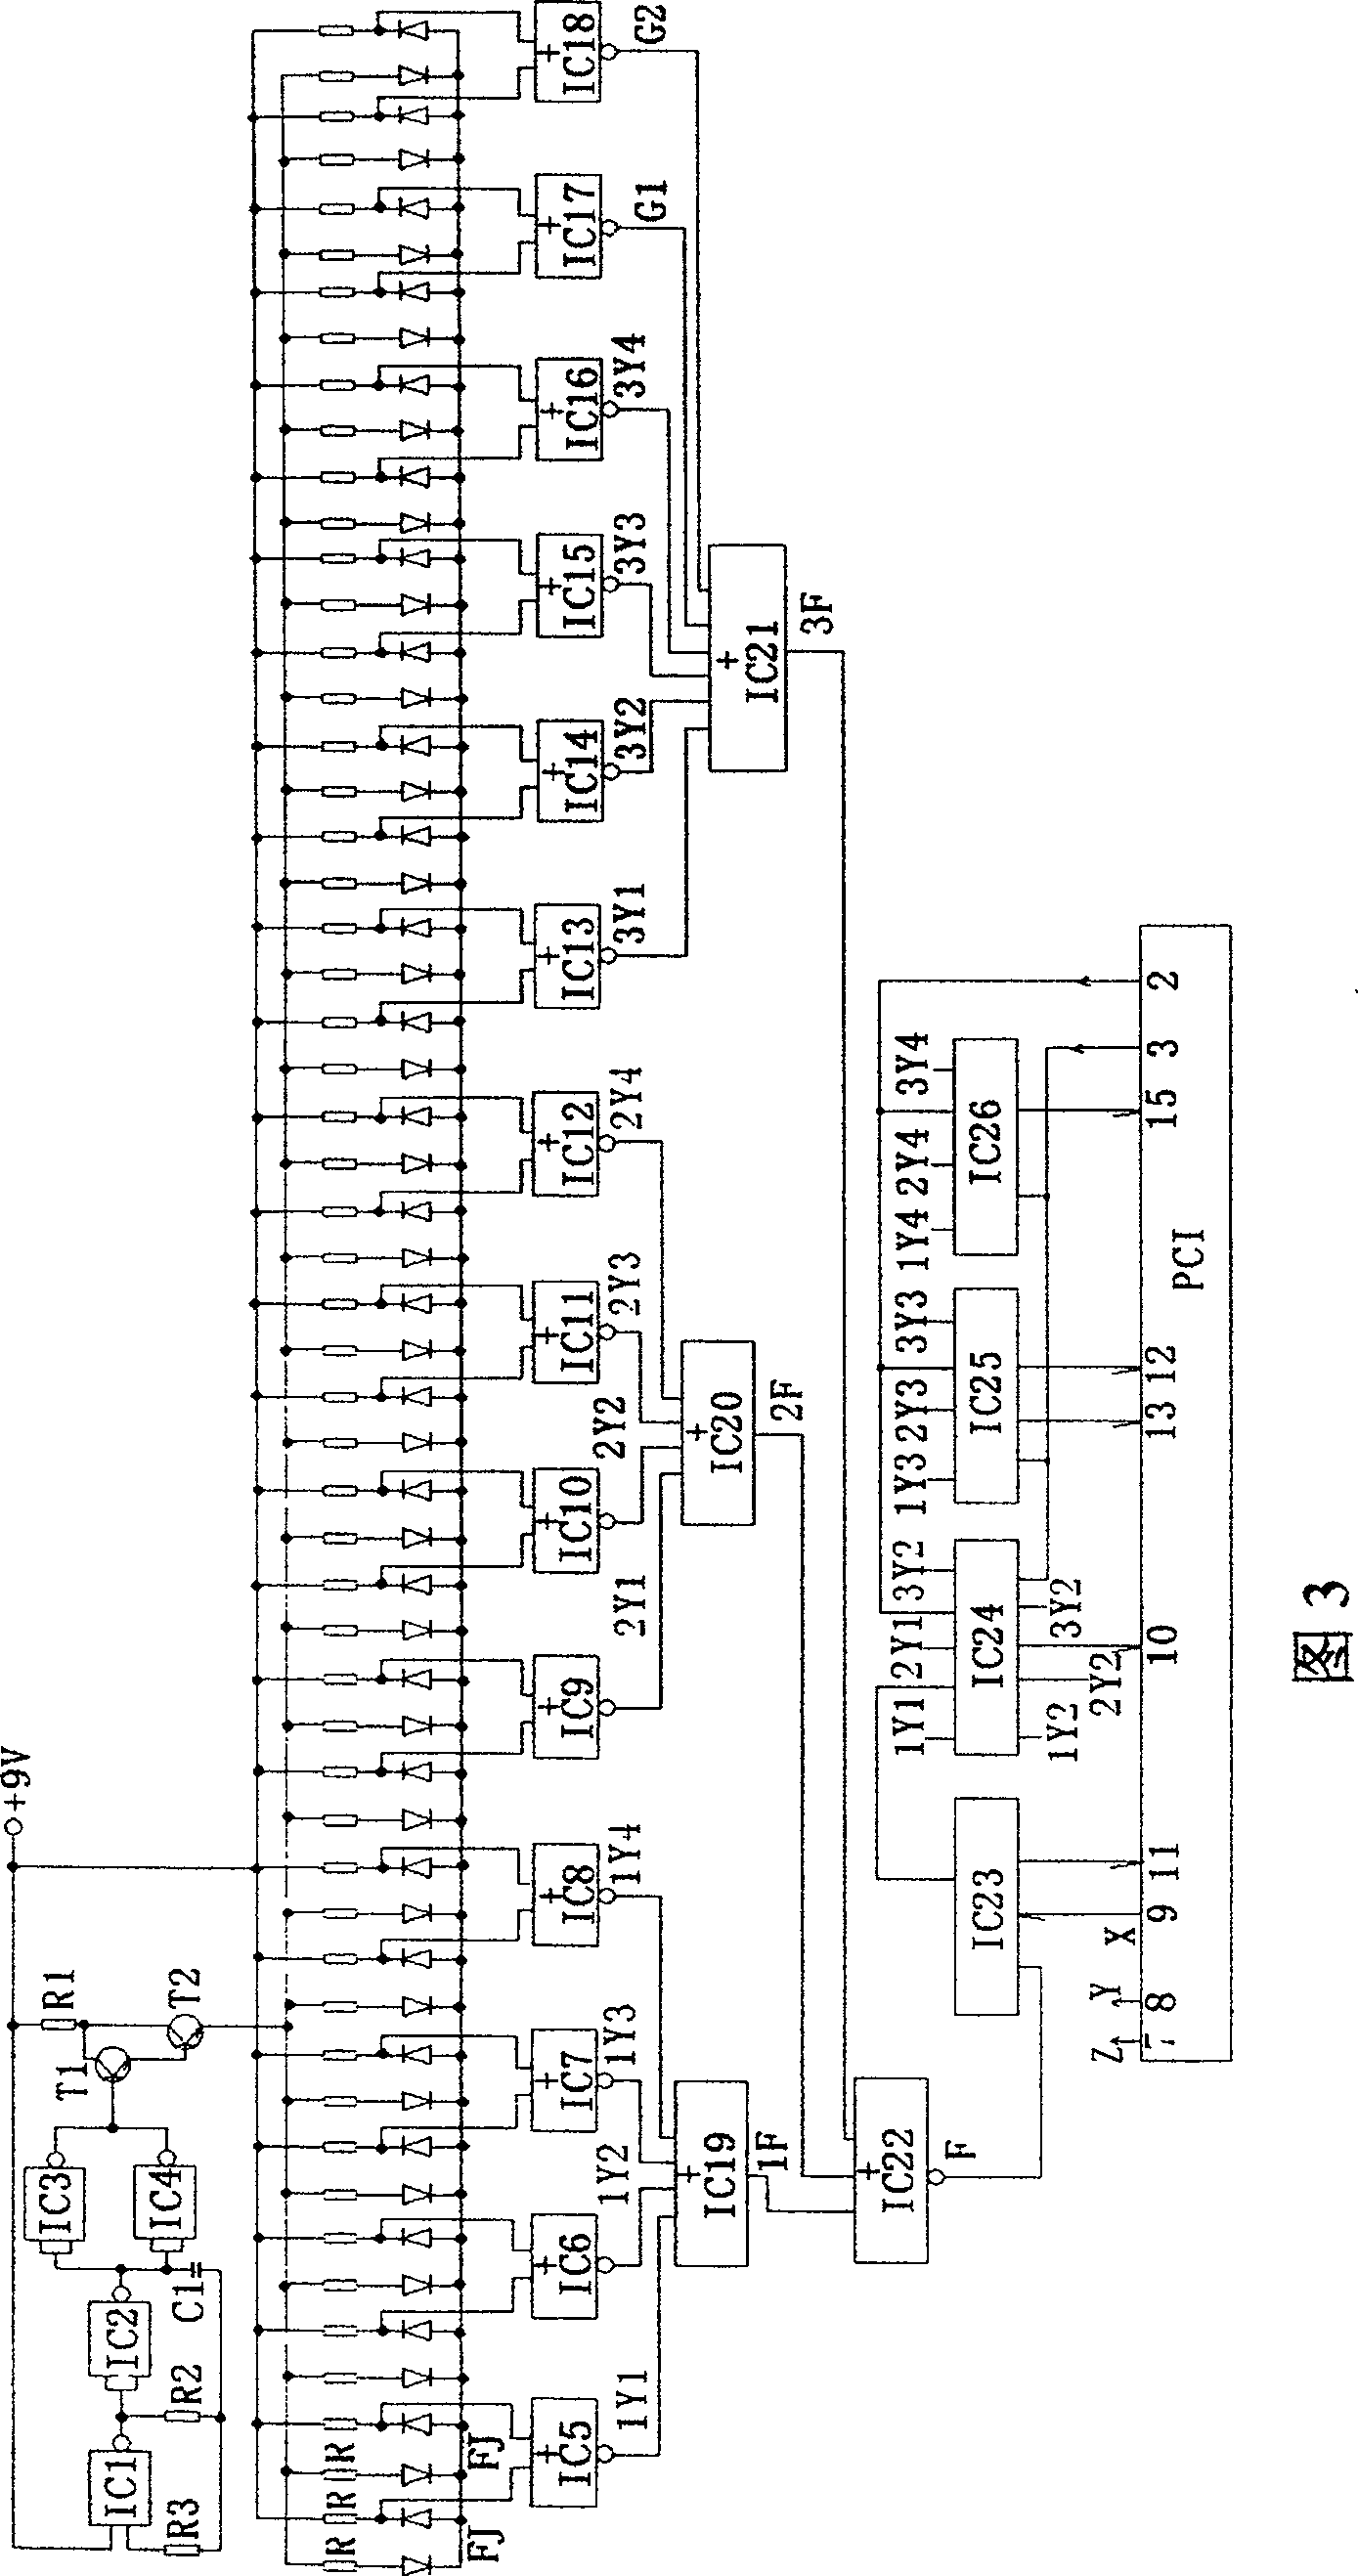 Mouse space memory retention model and intelligent action inspecting system